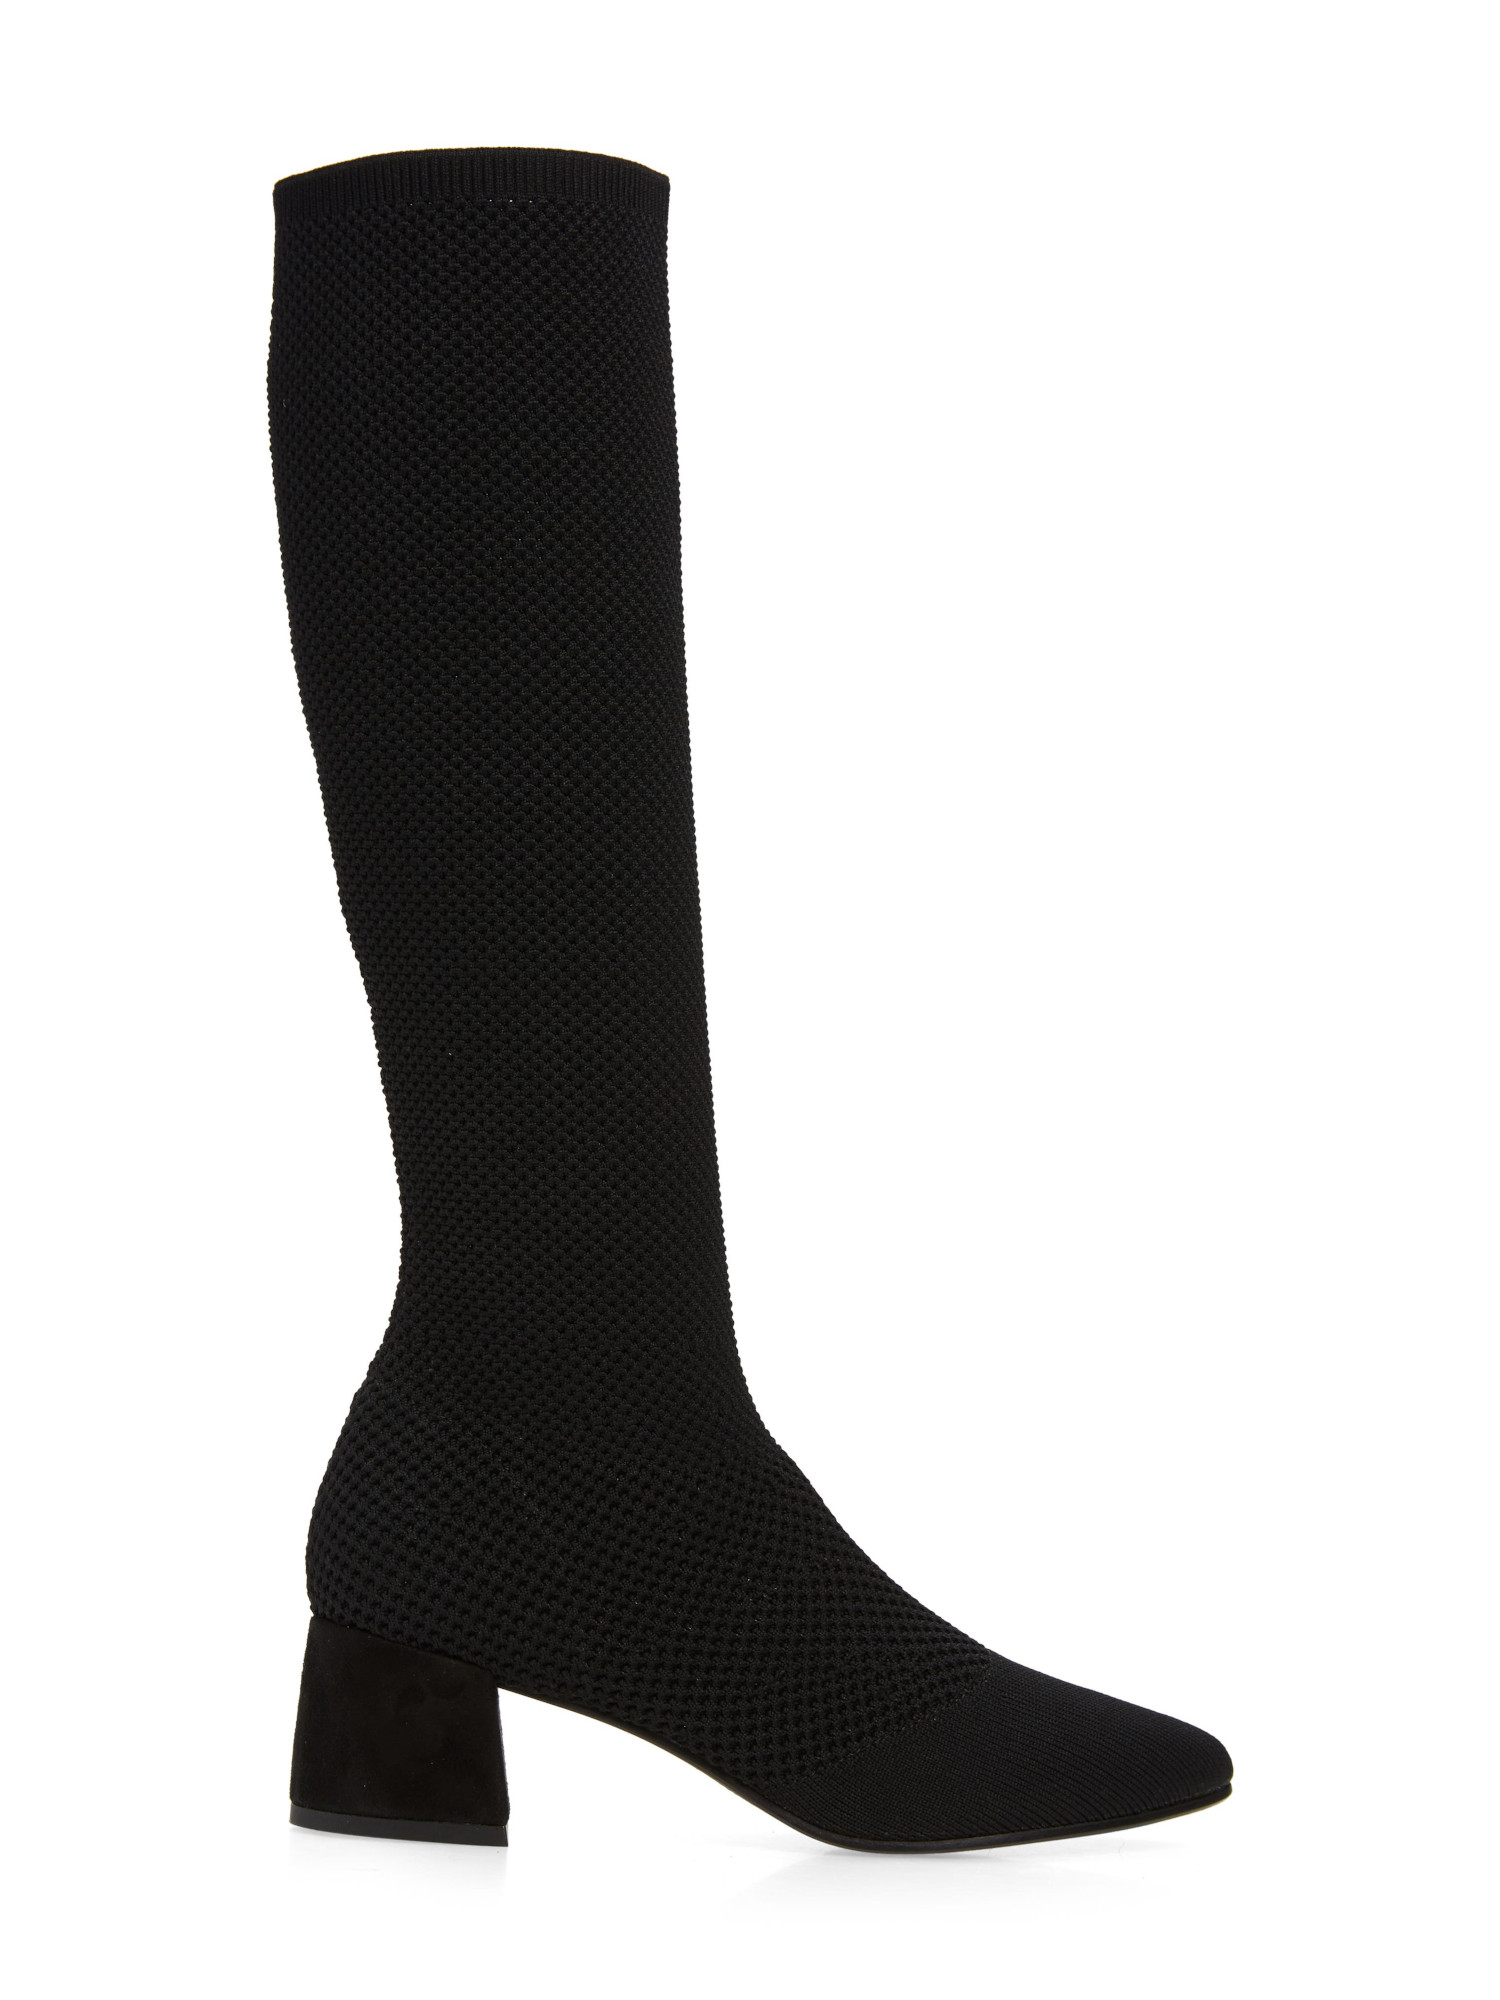 EILEEN FISHER Womens Black Knit Stretch Padded Innis Pointed Toe Dress Boots Shoes 8.5 M